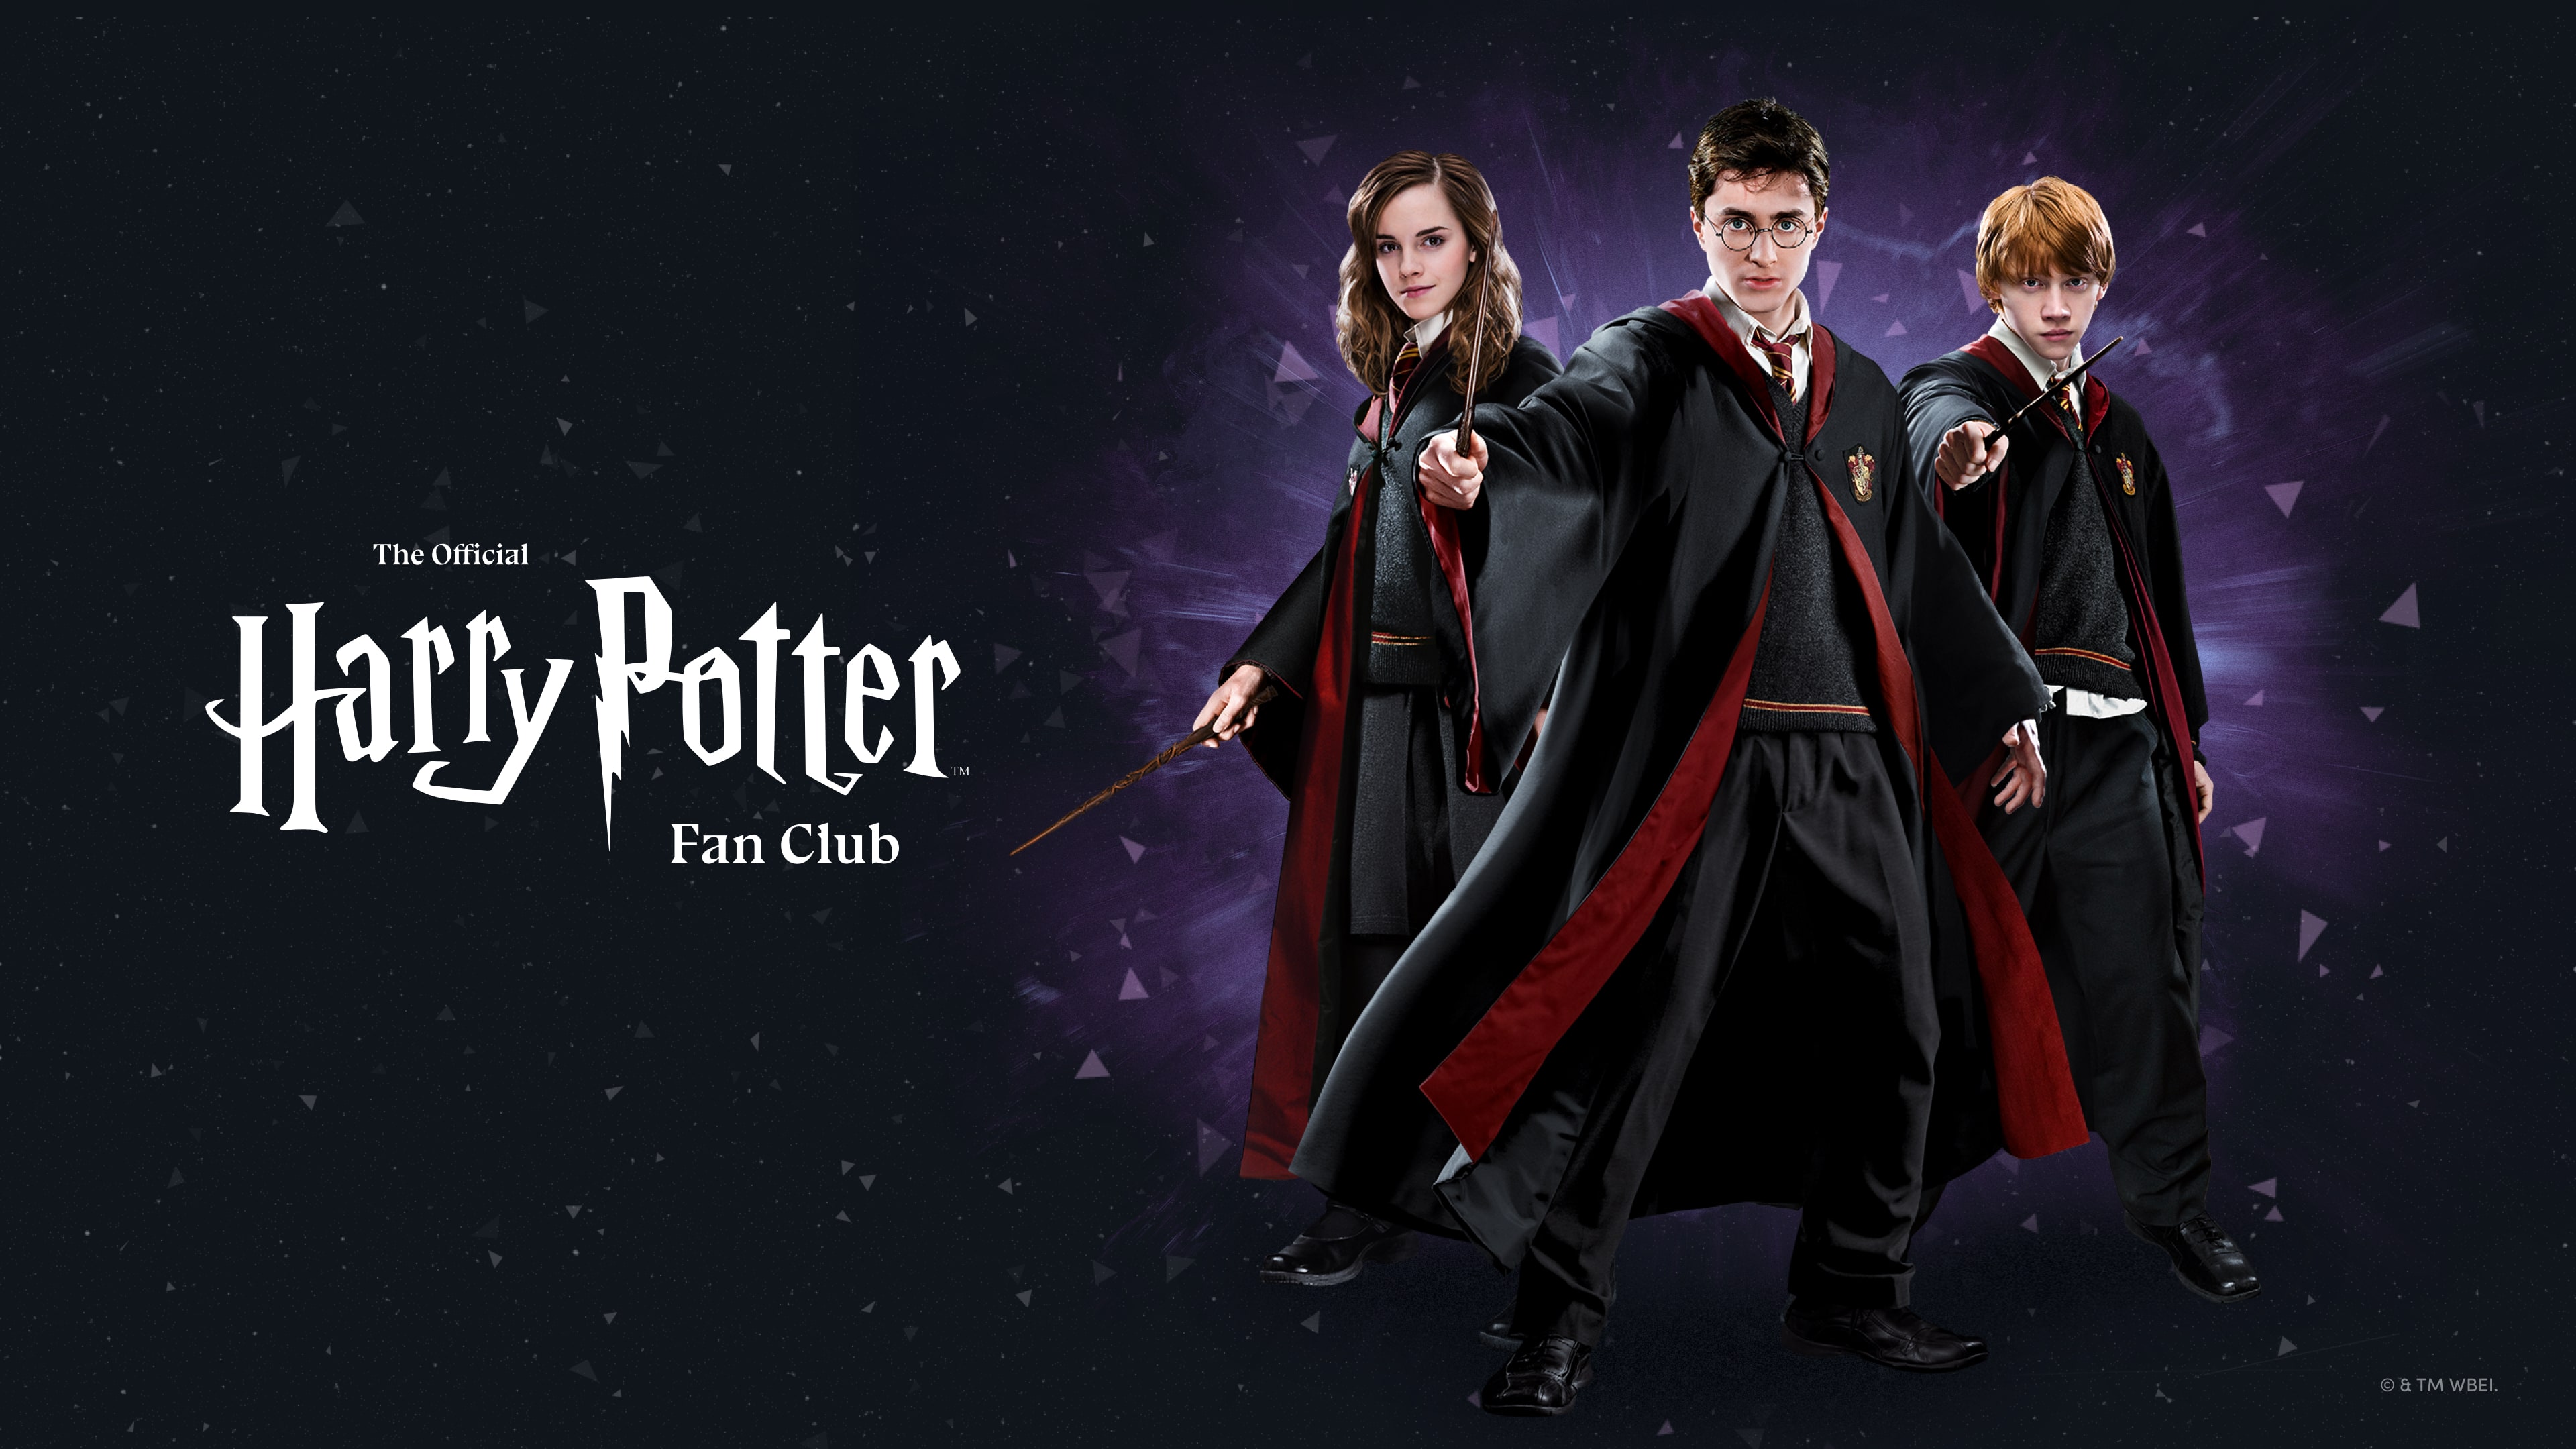 J.K. Rowling's Pottermore Launches 'Hogwarts Experience' Free Digital Site